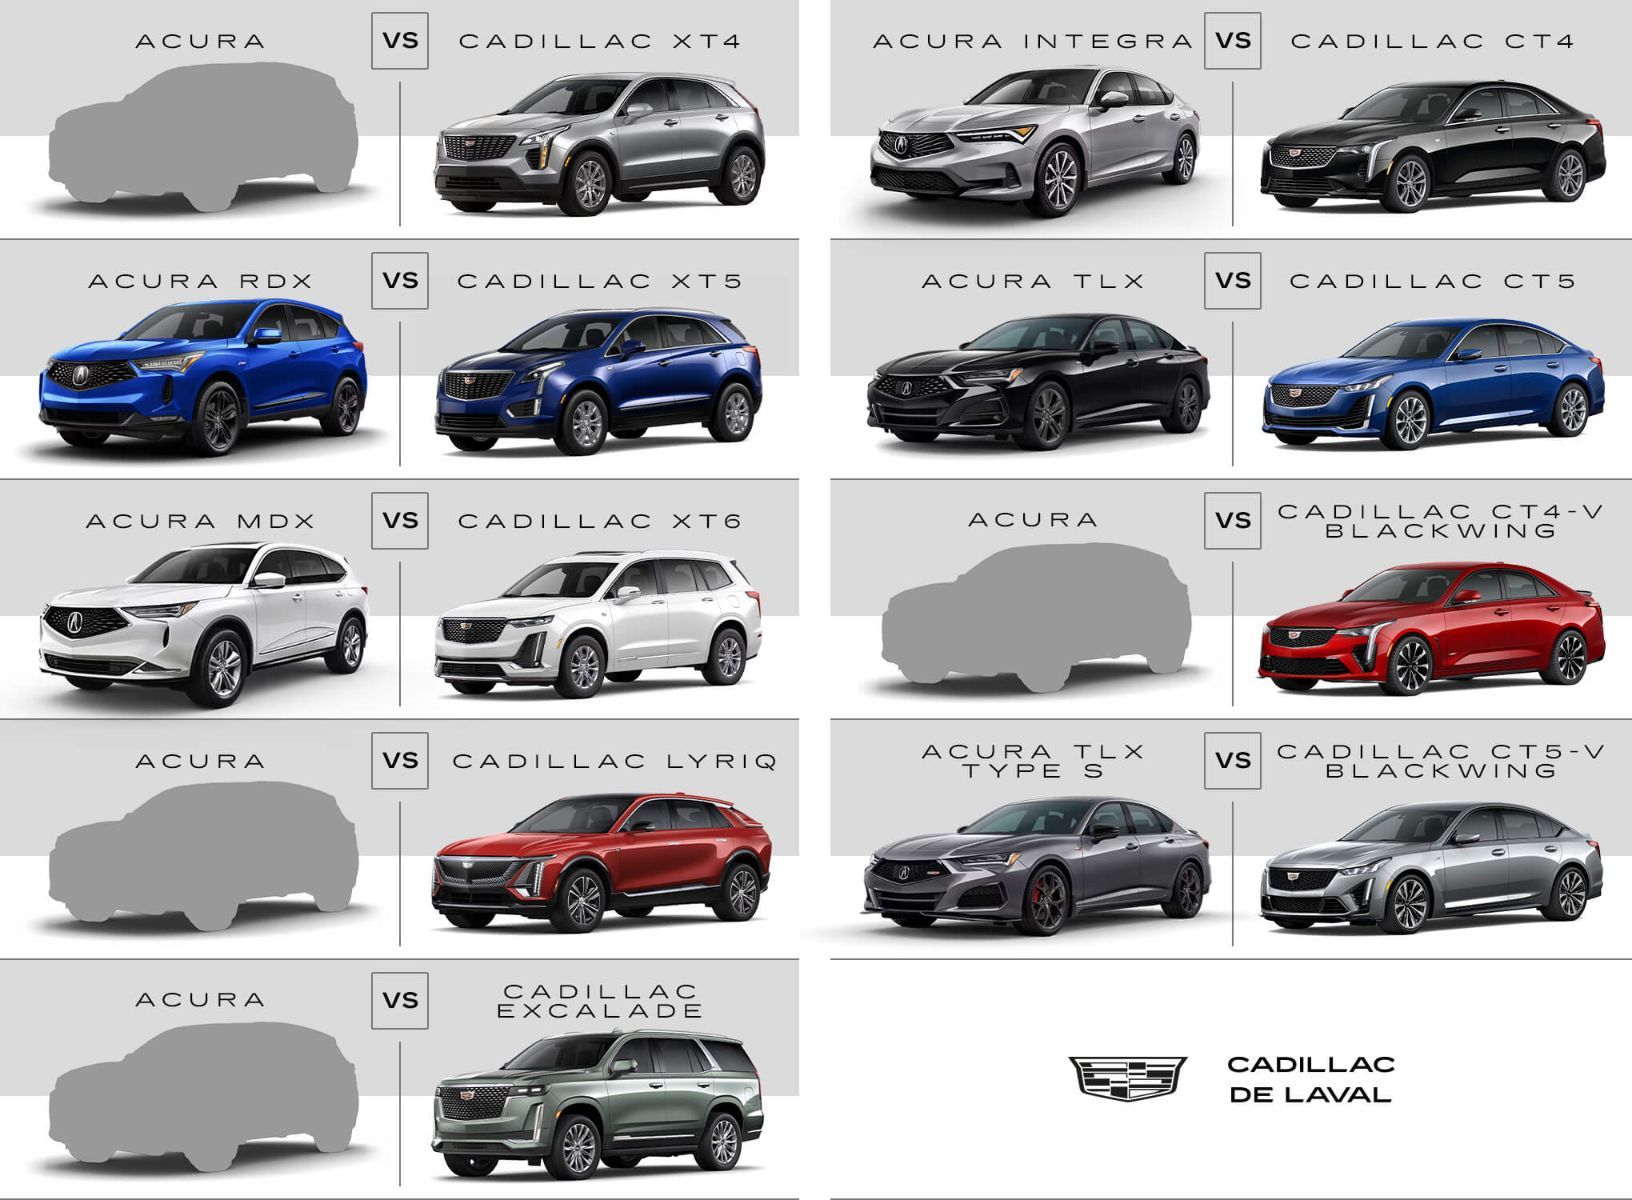 comparative chart of various Acura and Cadillac models